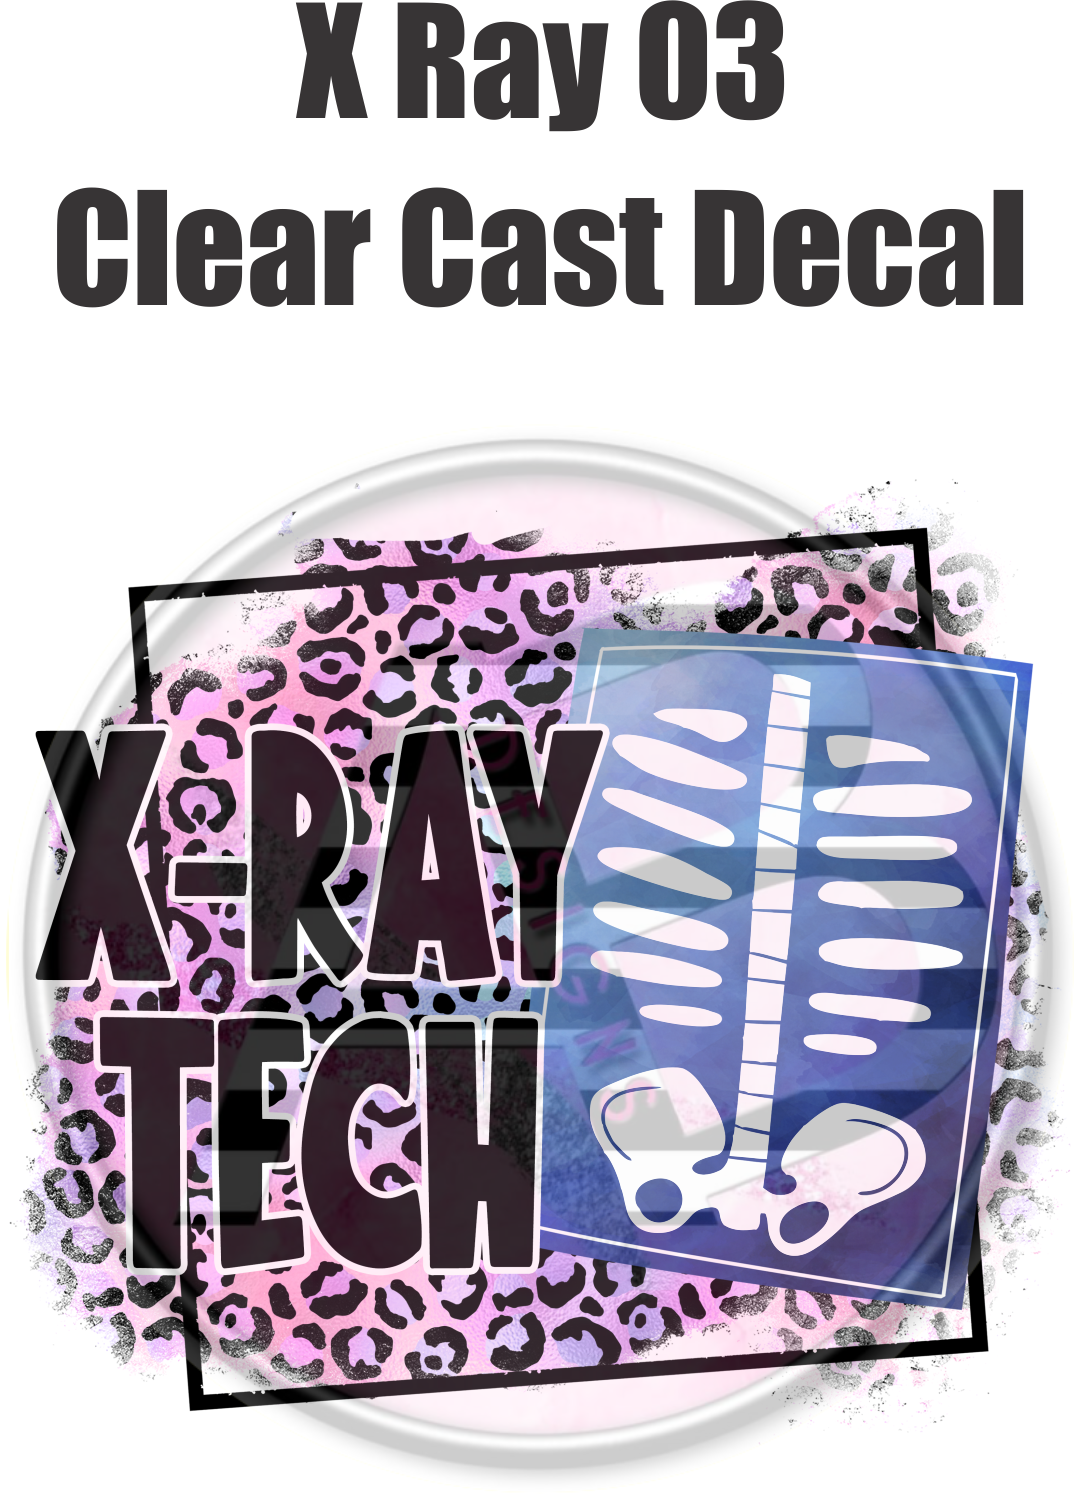 X Ray 03 - Clear Cast Decal - 31